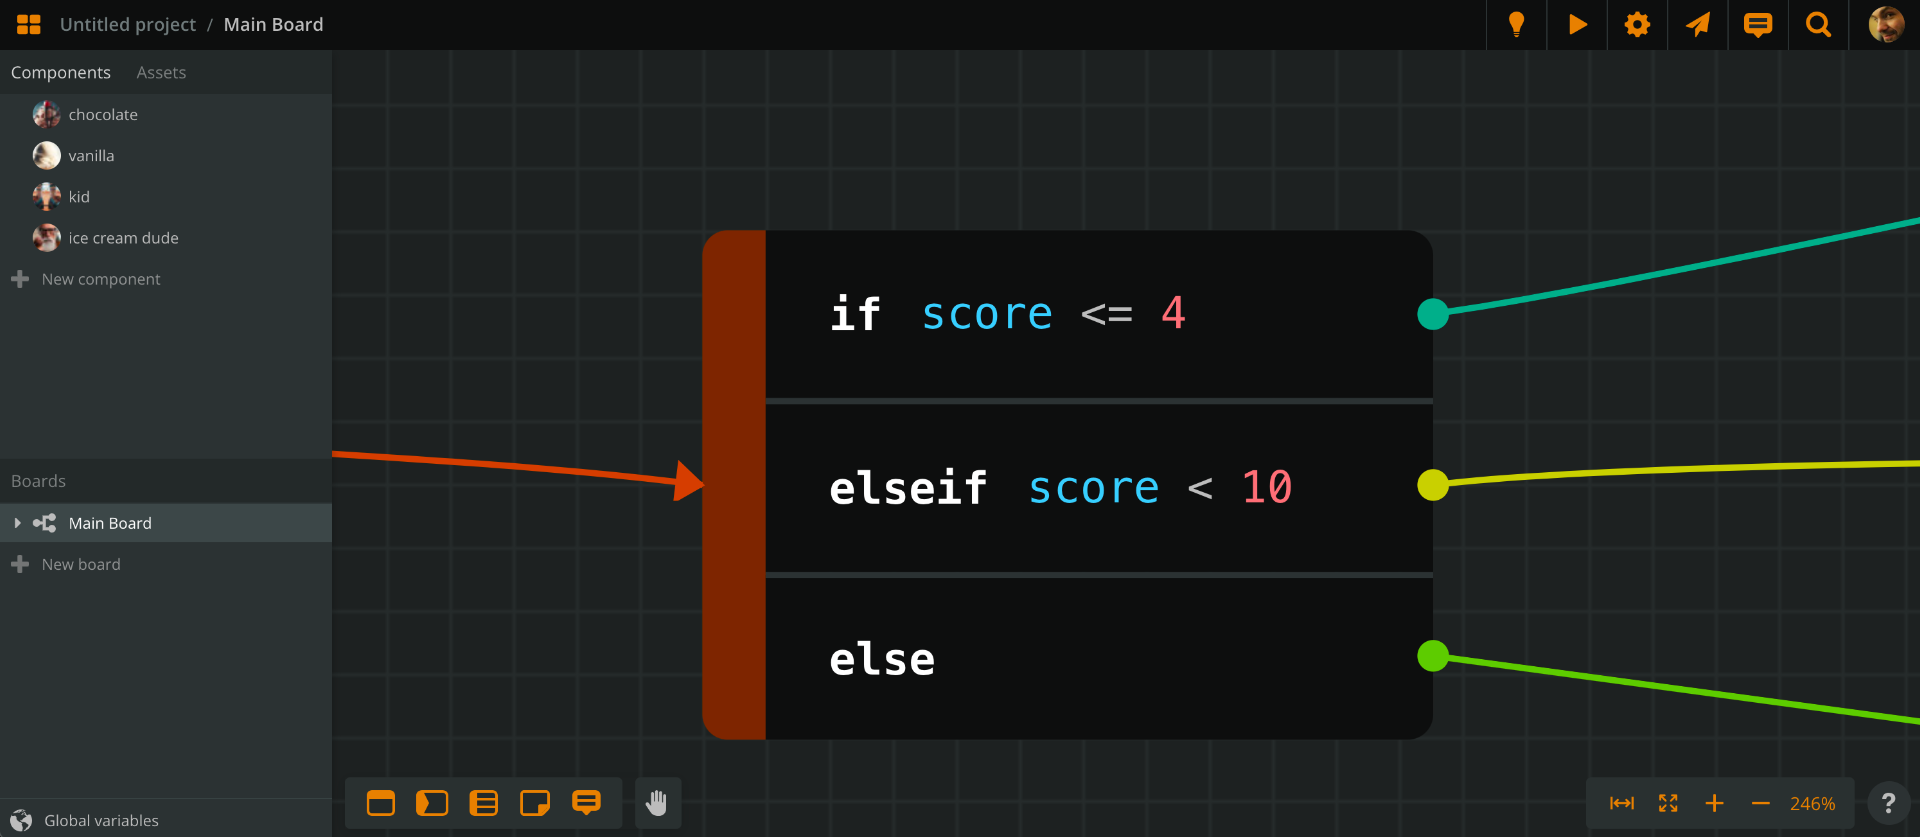 An example of a branch in Arcweave with 'if', 'else if', and 'else' conditions.